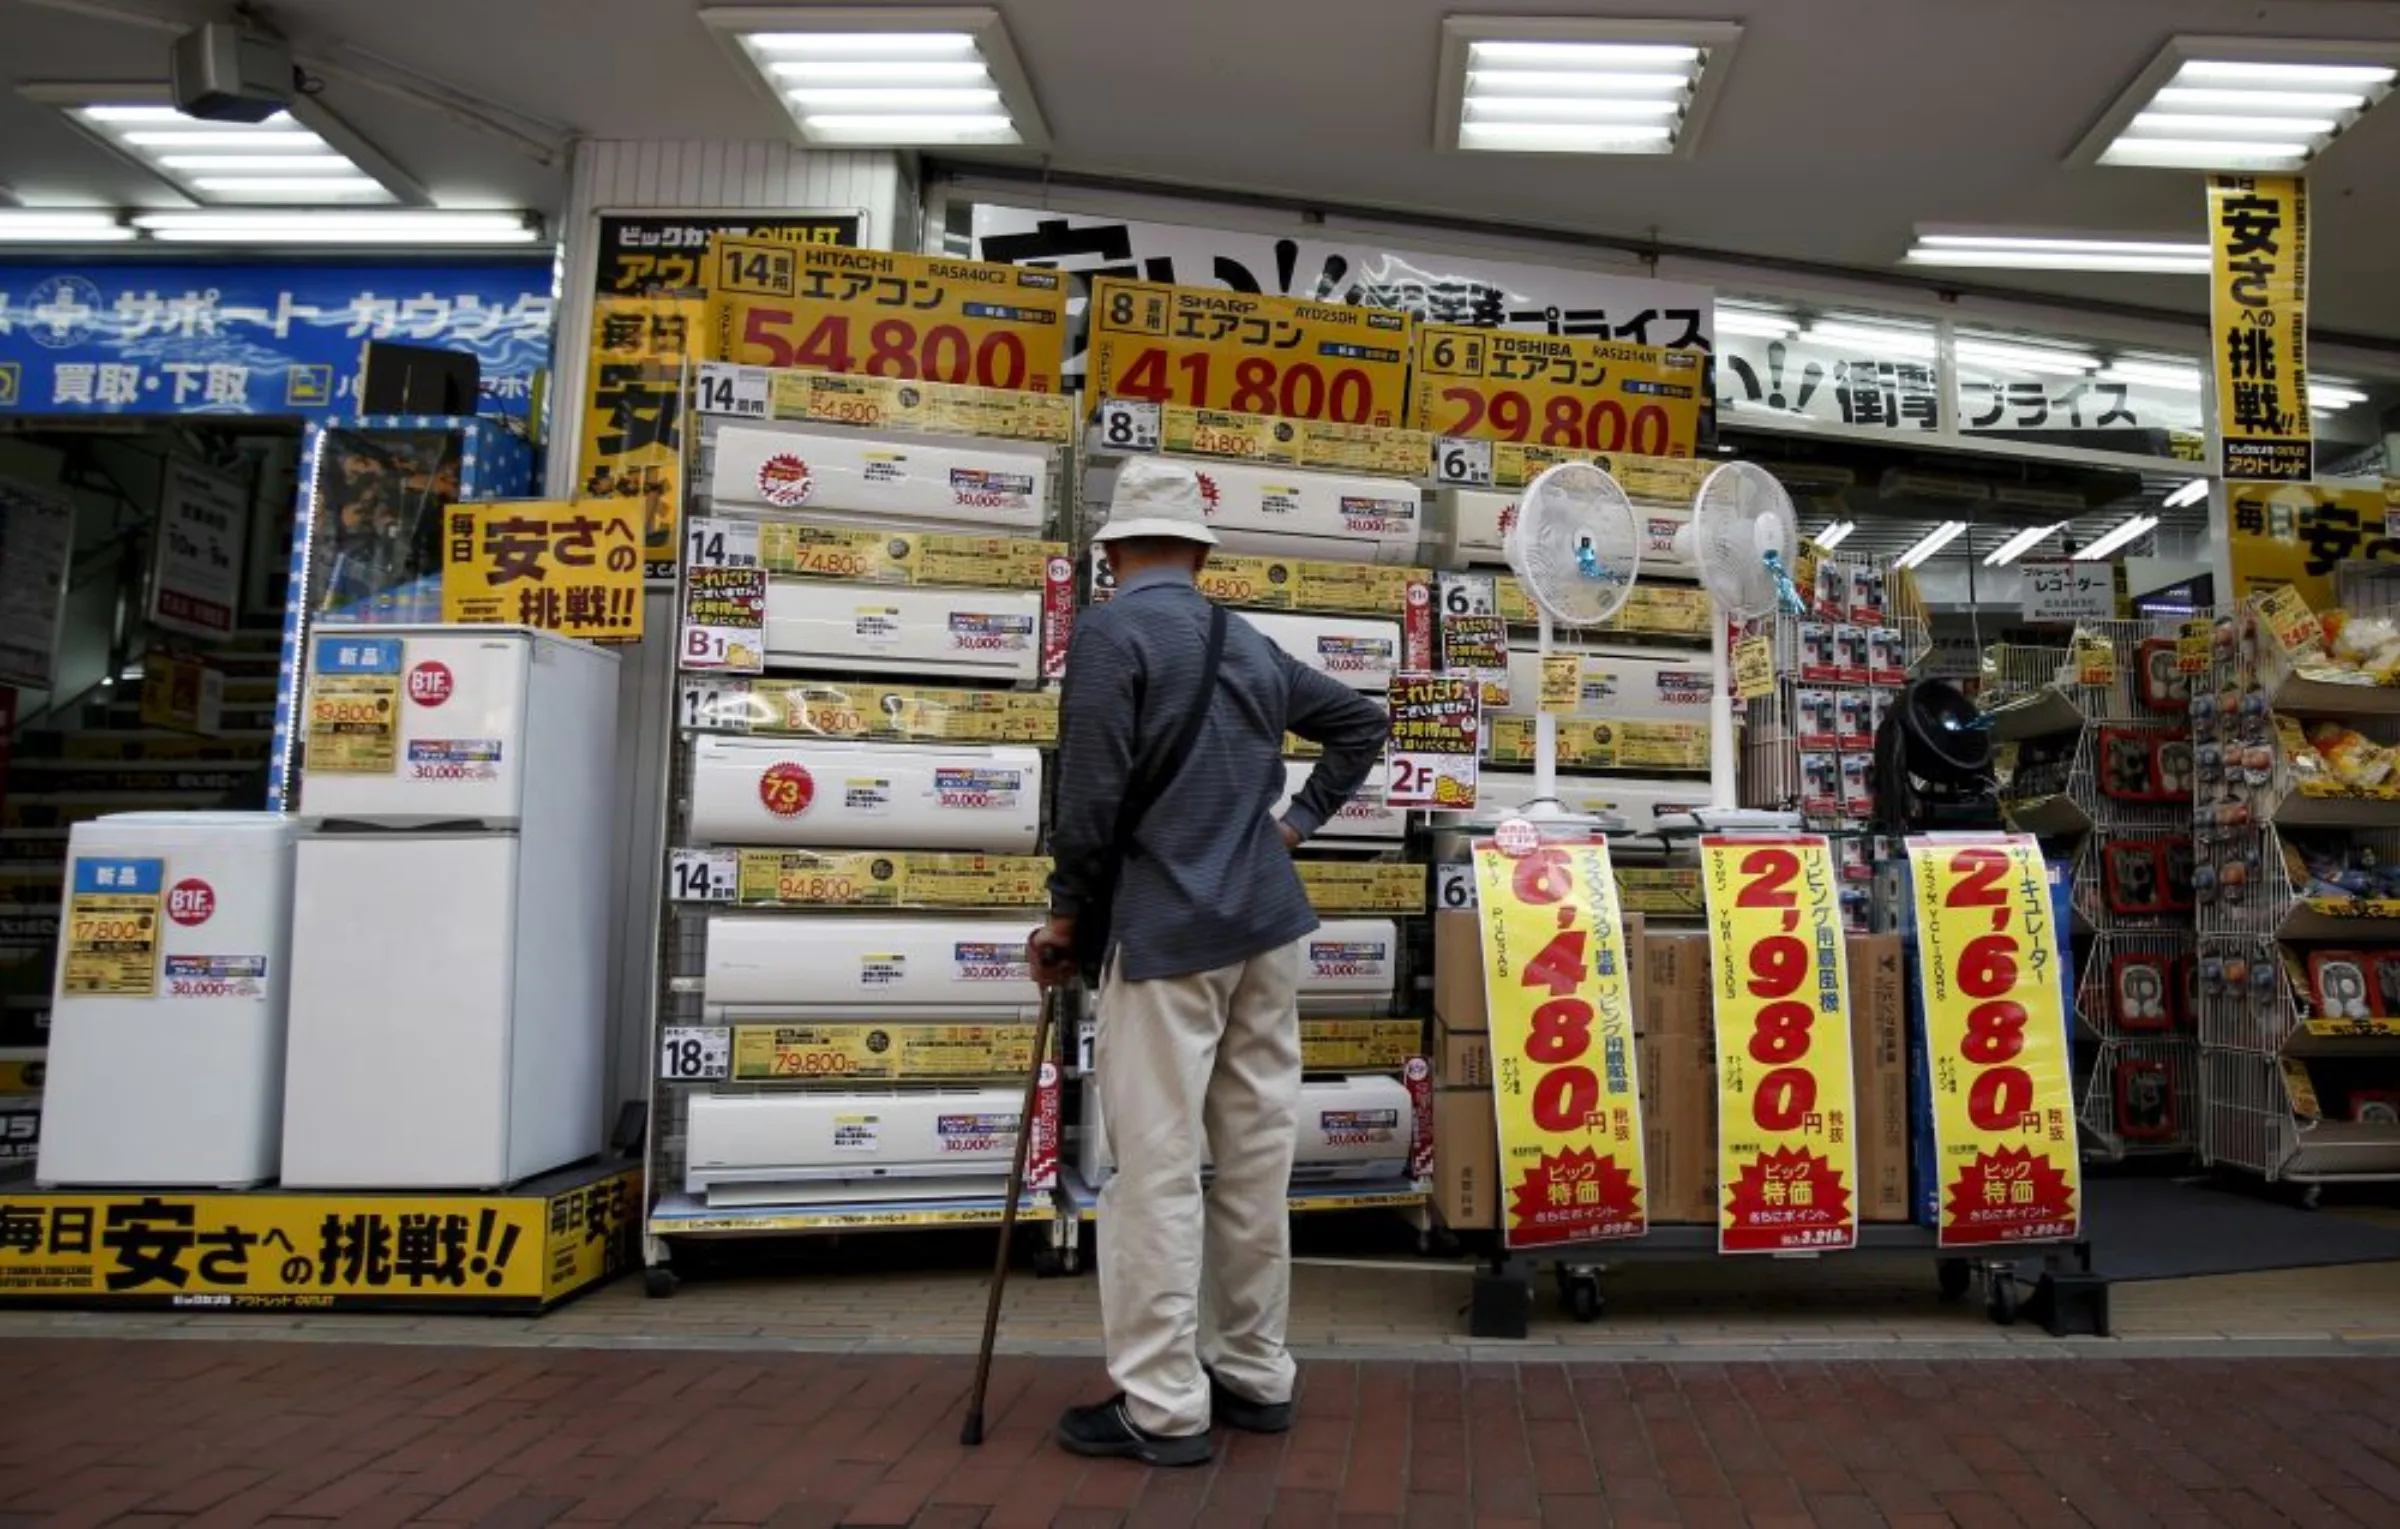 A man looks at air conditioners outside a discount electronics store at a shopping district in Tokyo, Japan, April 28, 2015. REUTERS/Yuya Shino